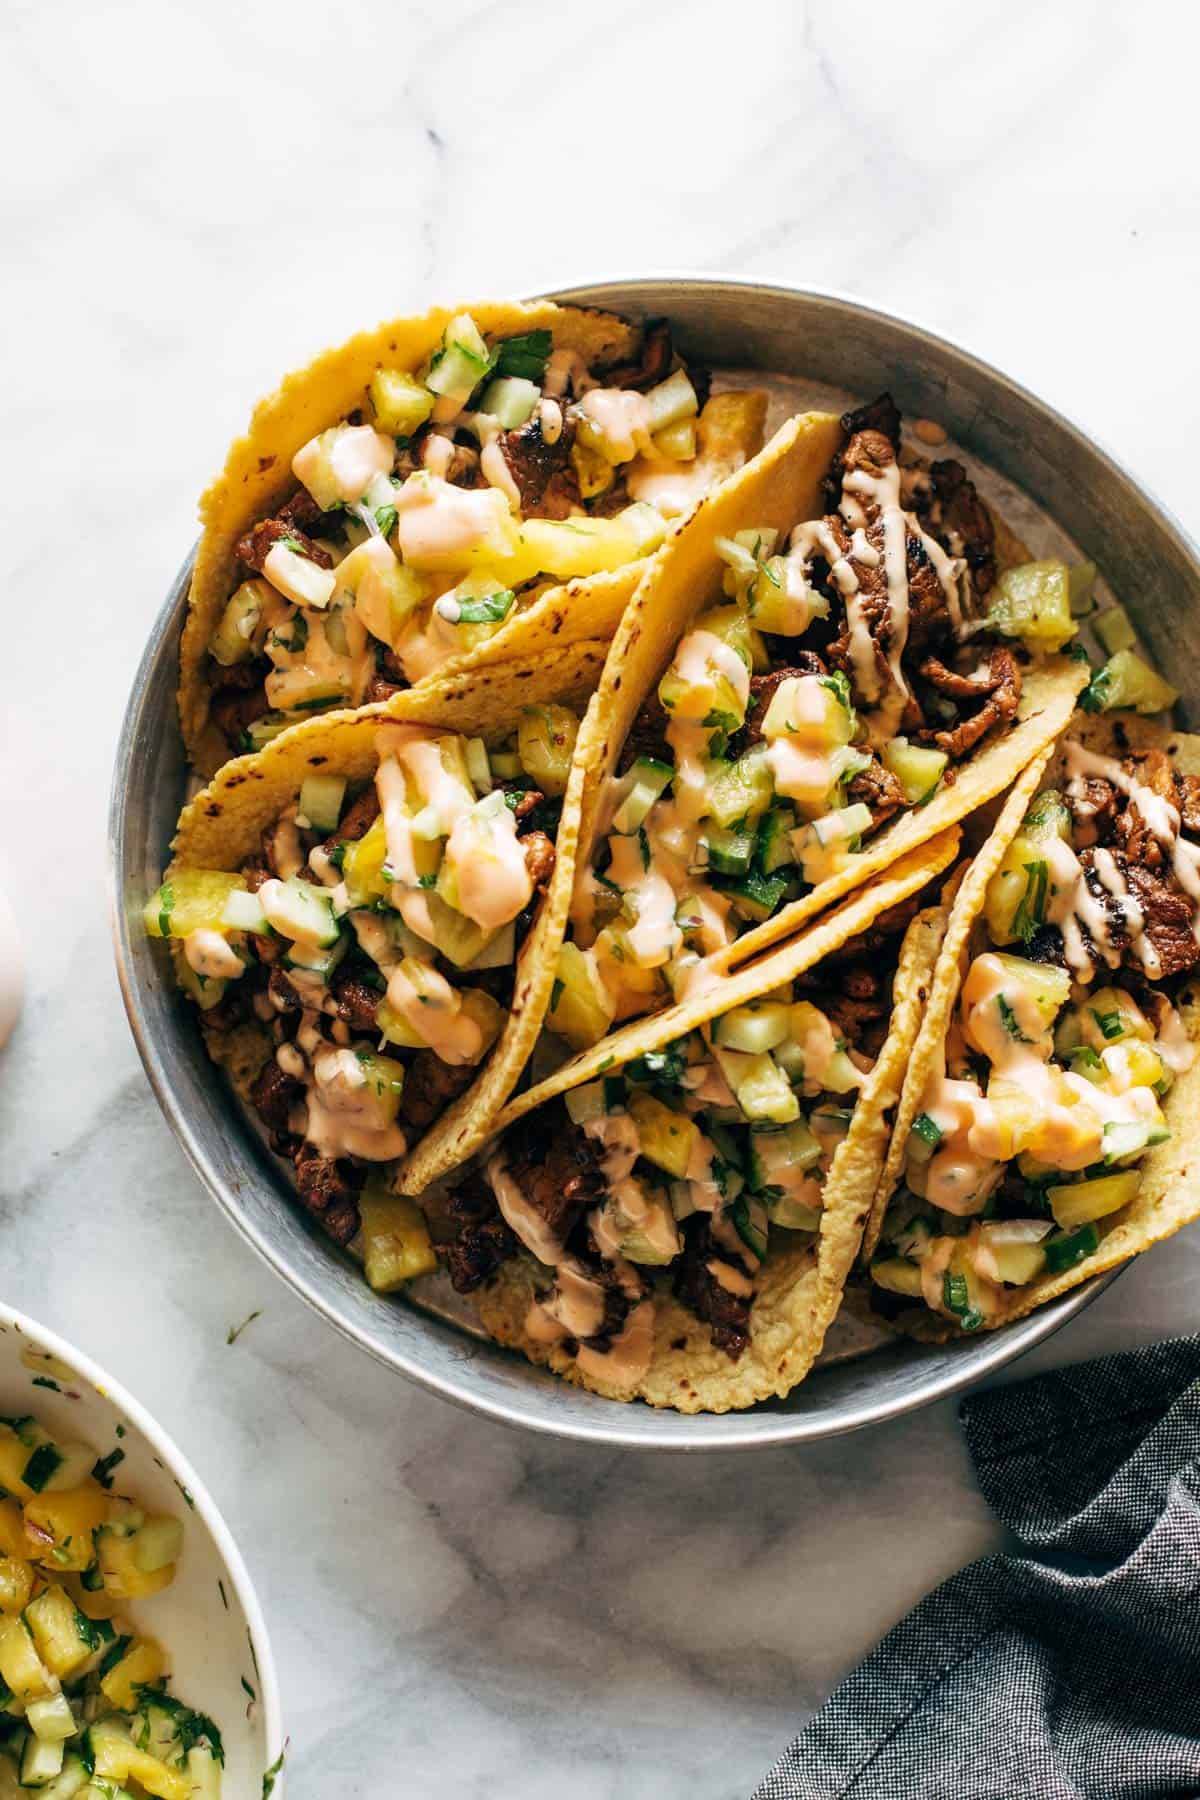 Caramelized Pork Tacos with Pineapple Salsa in a bowl.